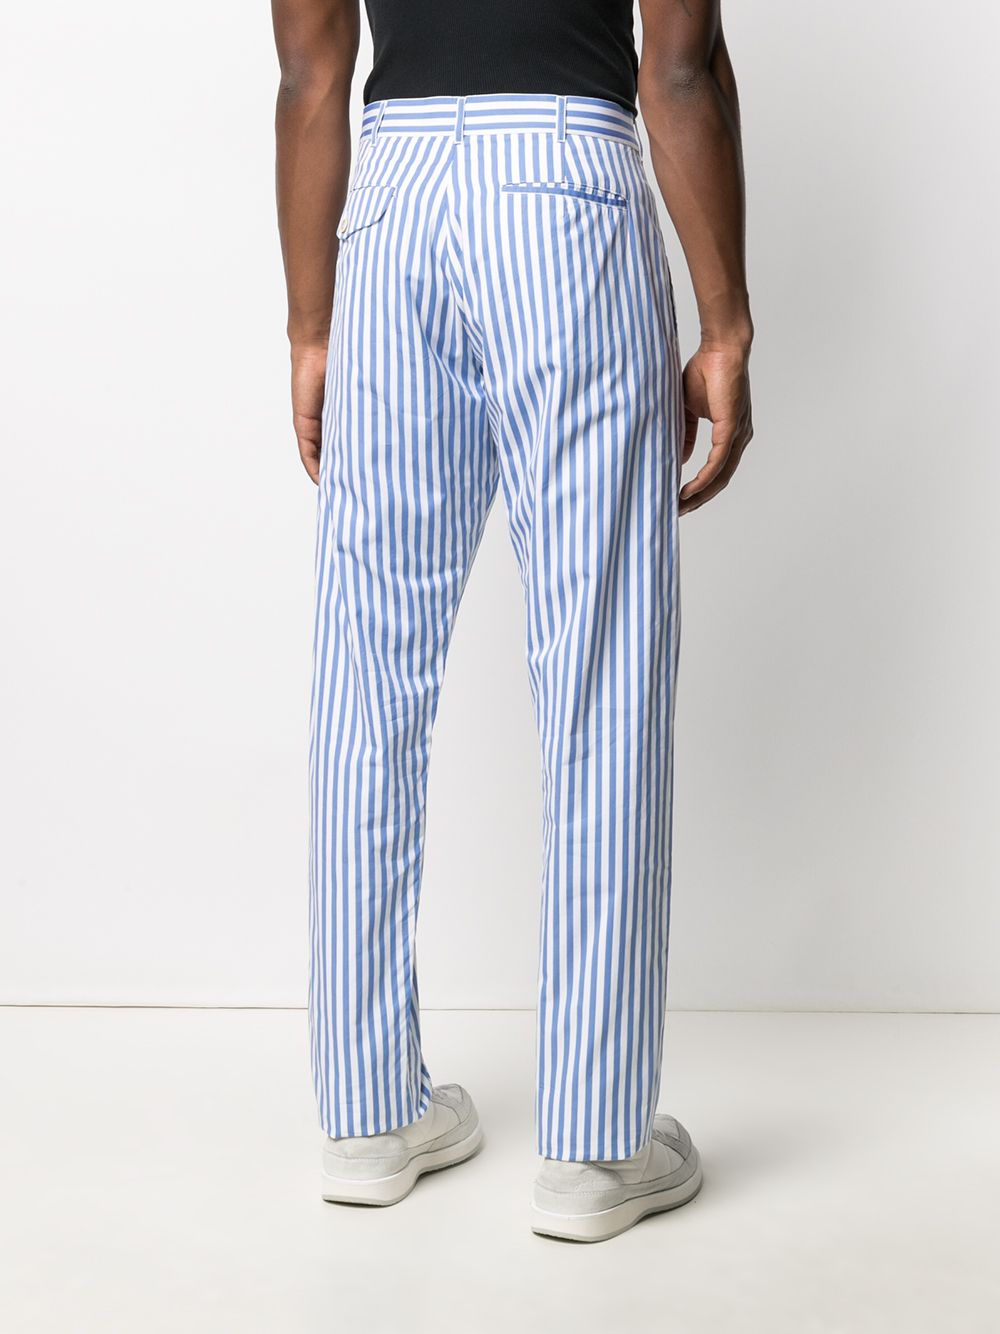 Which color top goes best with blue stripped trouser  Quora